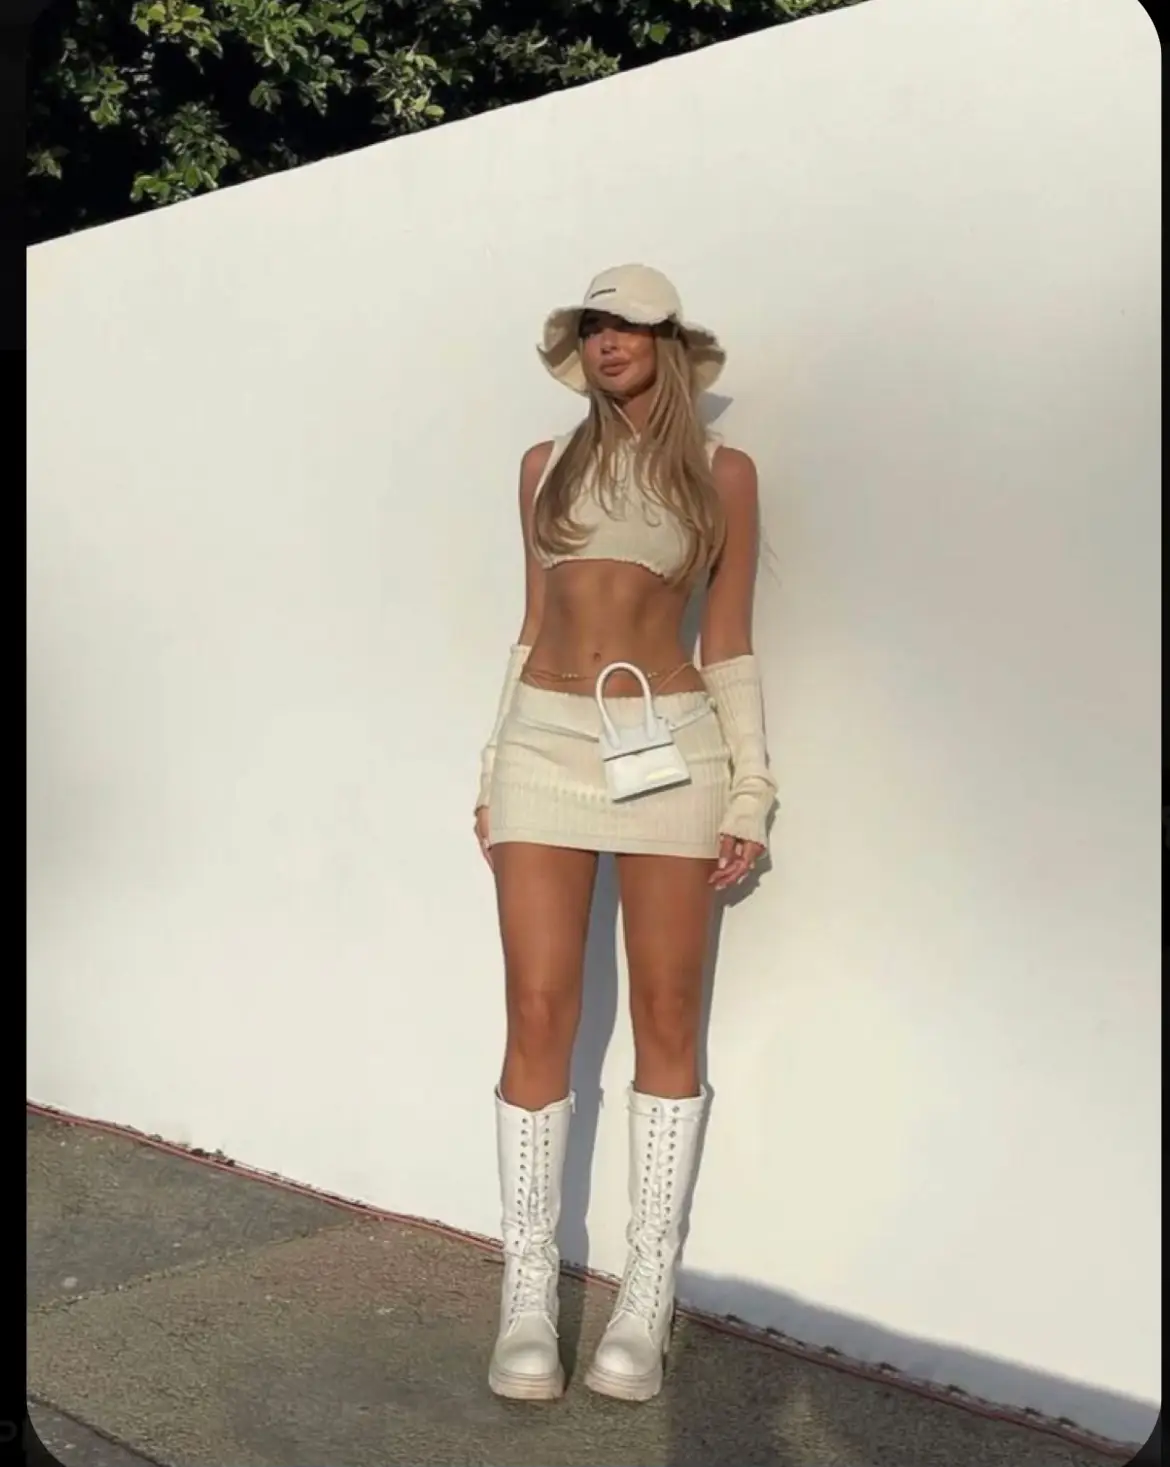  A woman wearing a white hat and white shorts stands in front of a wall.